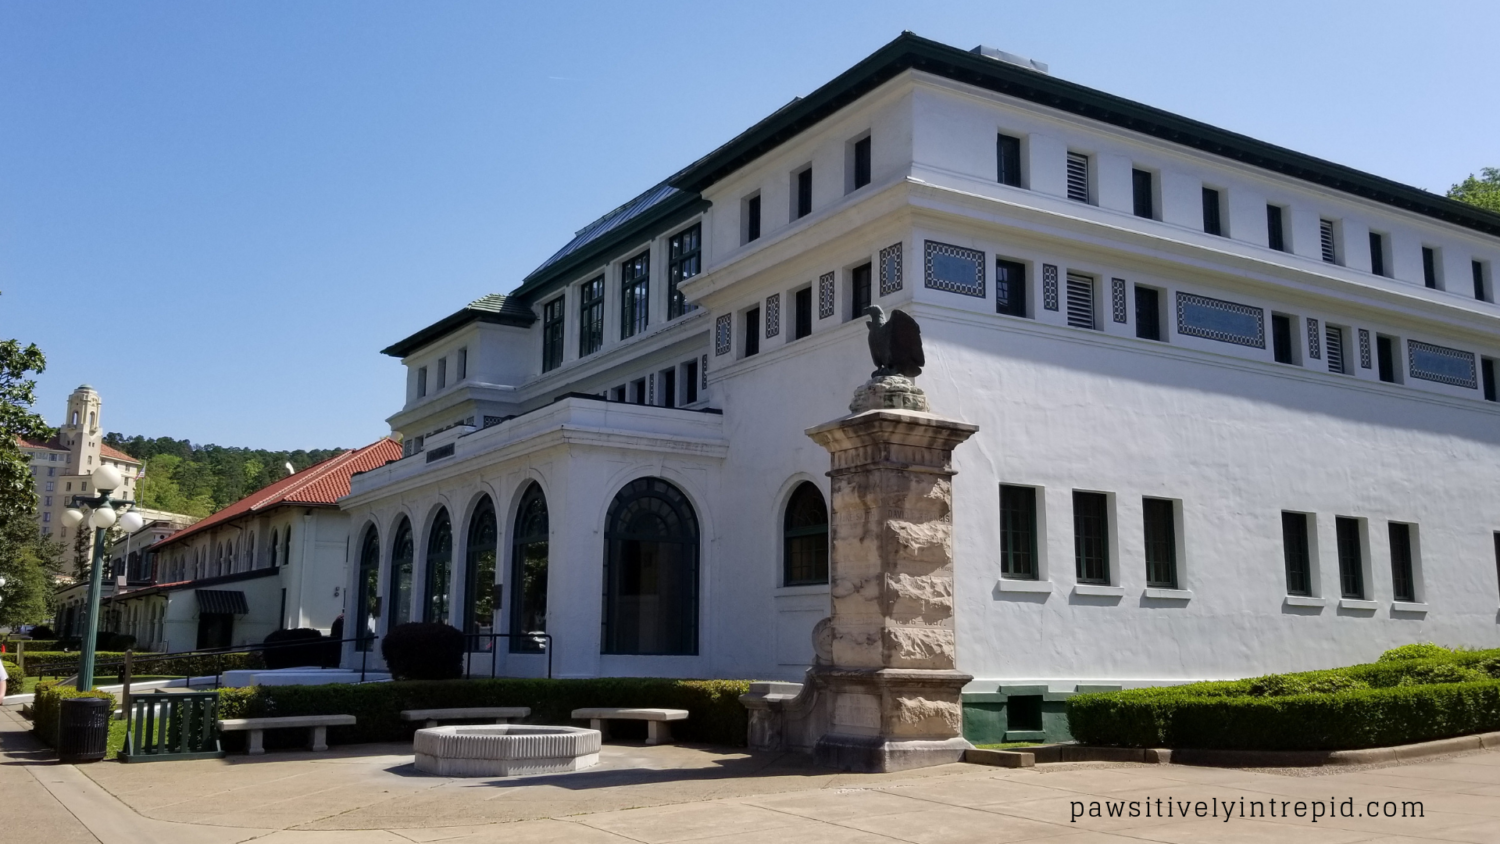 Historic bathhouse in pet friendly Hot Springs National Park in Arkansas